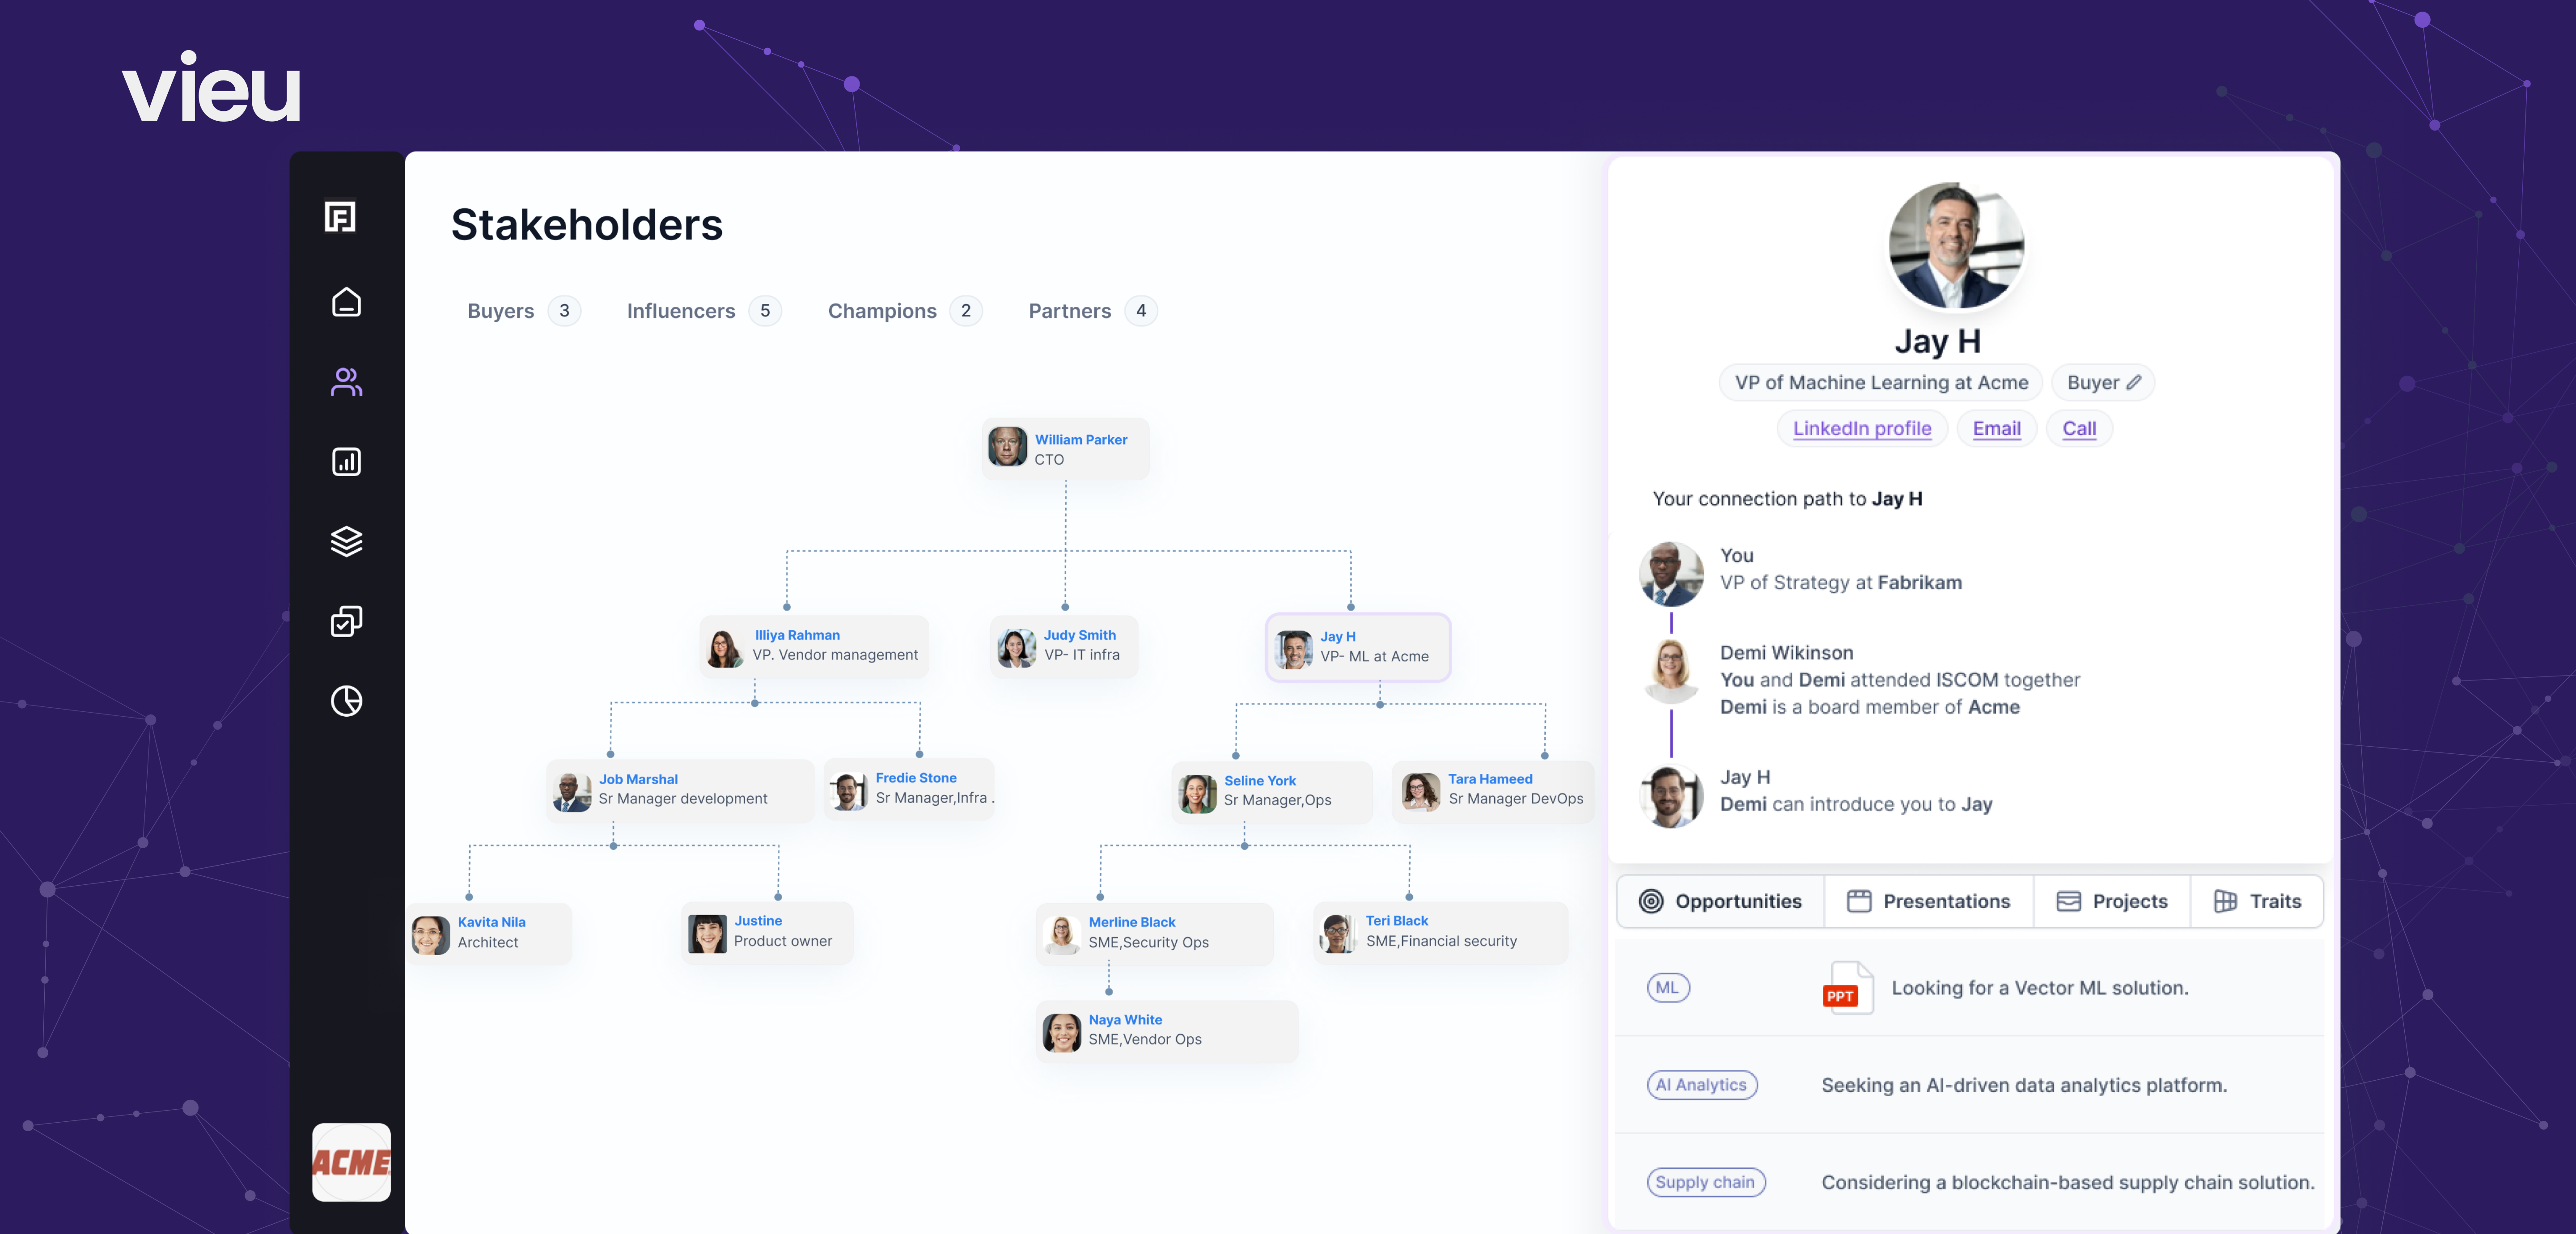 Vieu offers an Autogenerated Stakeholder Map for users to supercharhe their enterprise sales outreach